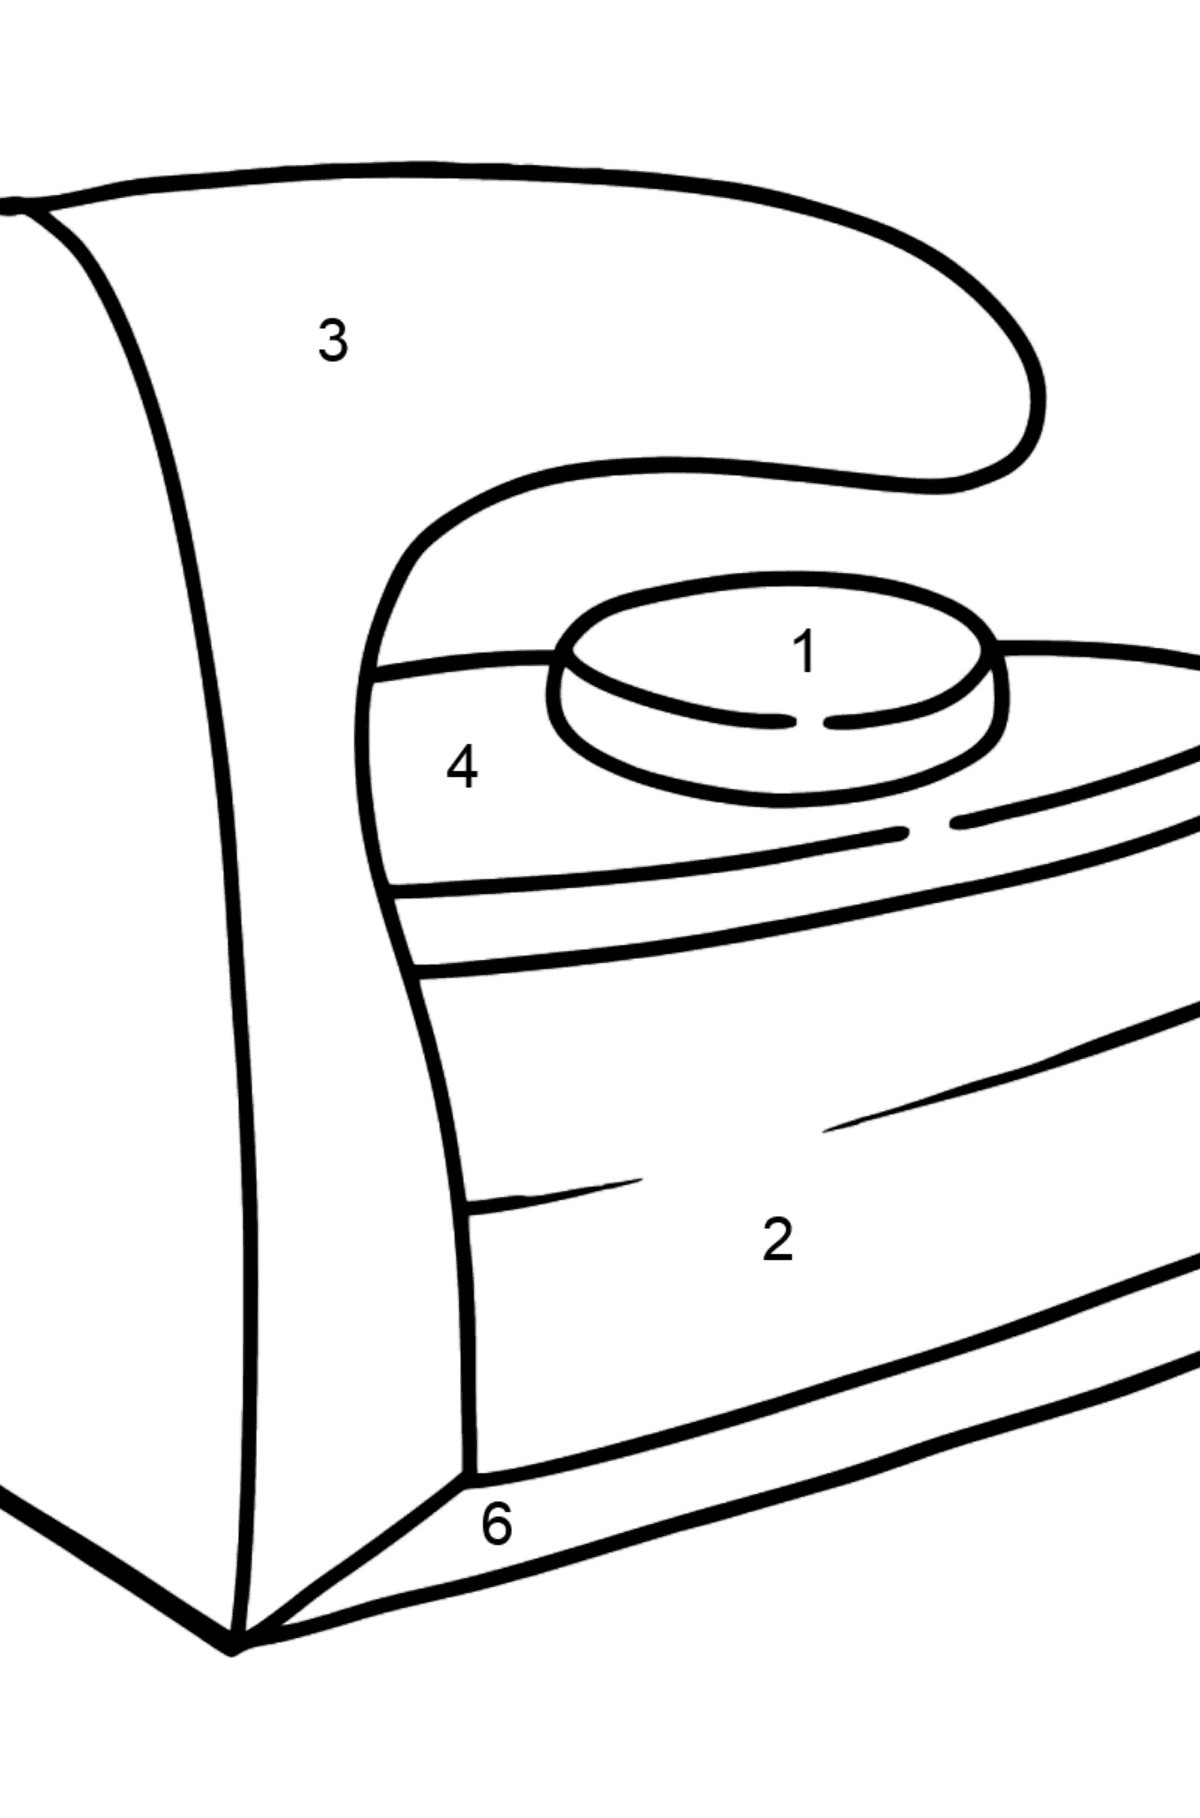 Iron for ironing coloring page - Coloring by Numbers for Kids